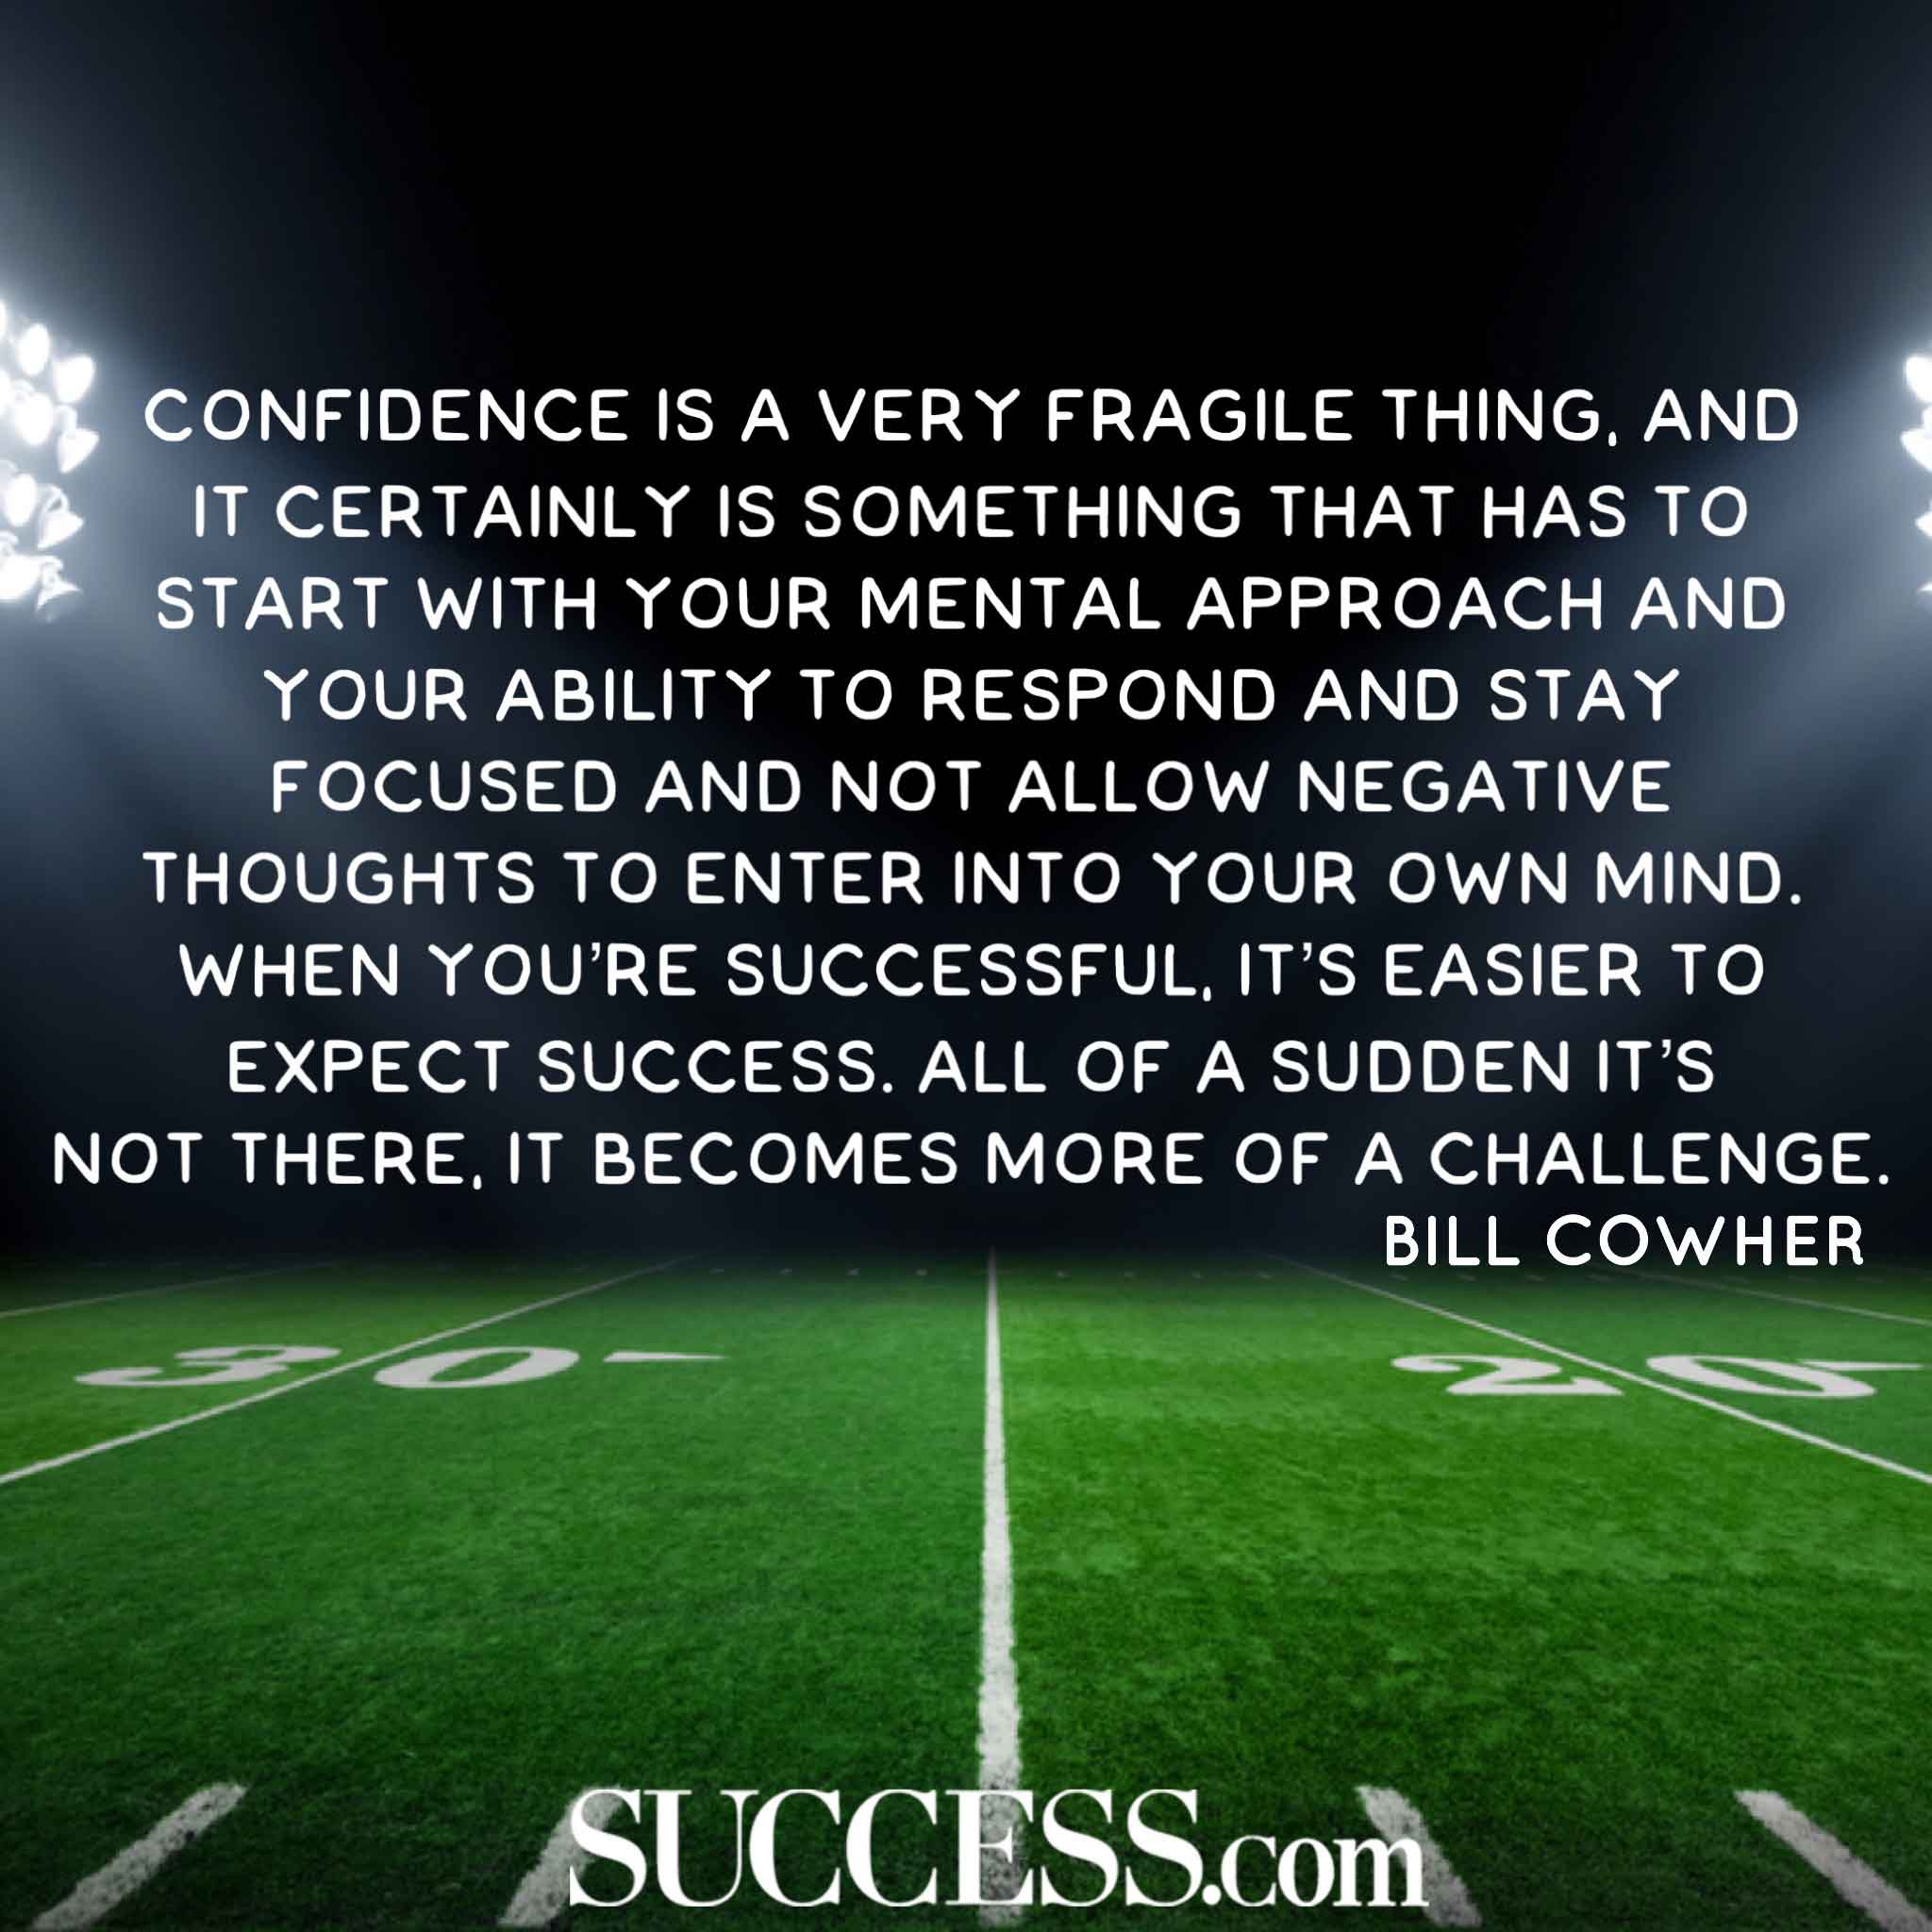 20 Motivational Quotes by the Most Inspiring NFL Coaches of All Time